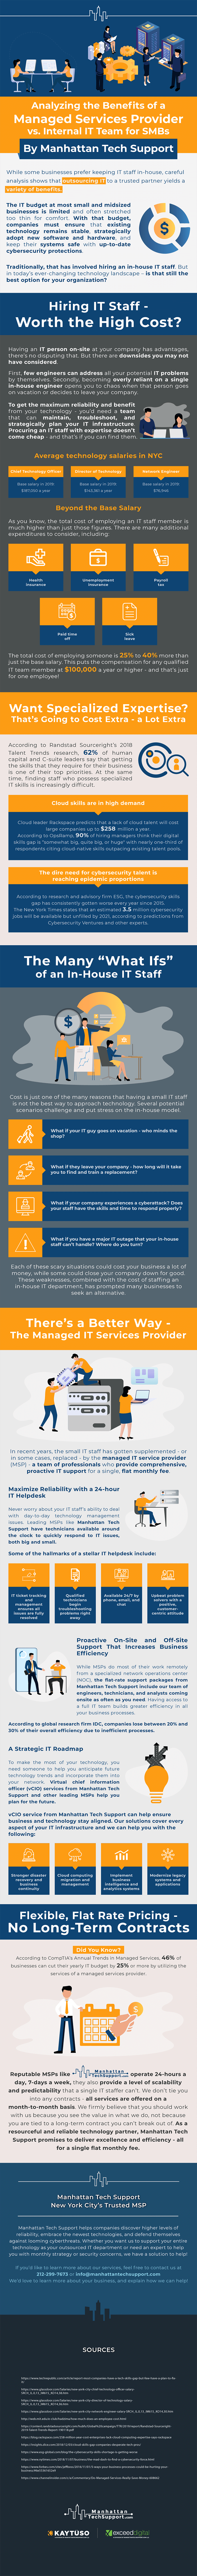 SMB Infographic benefits of MSP 